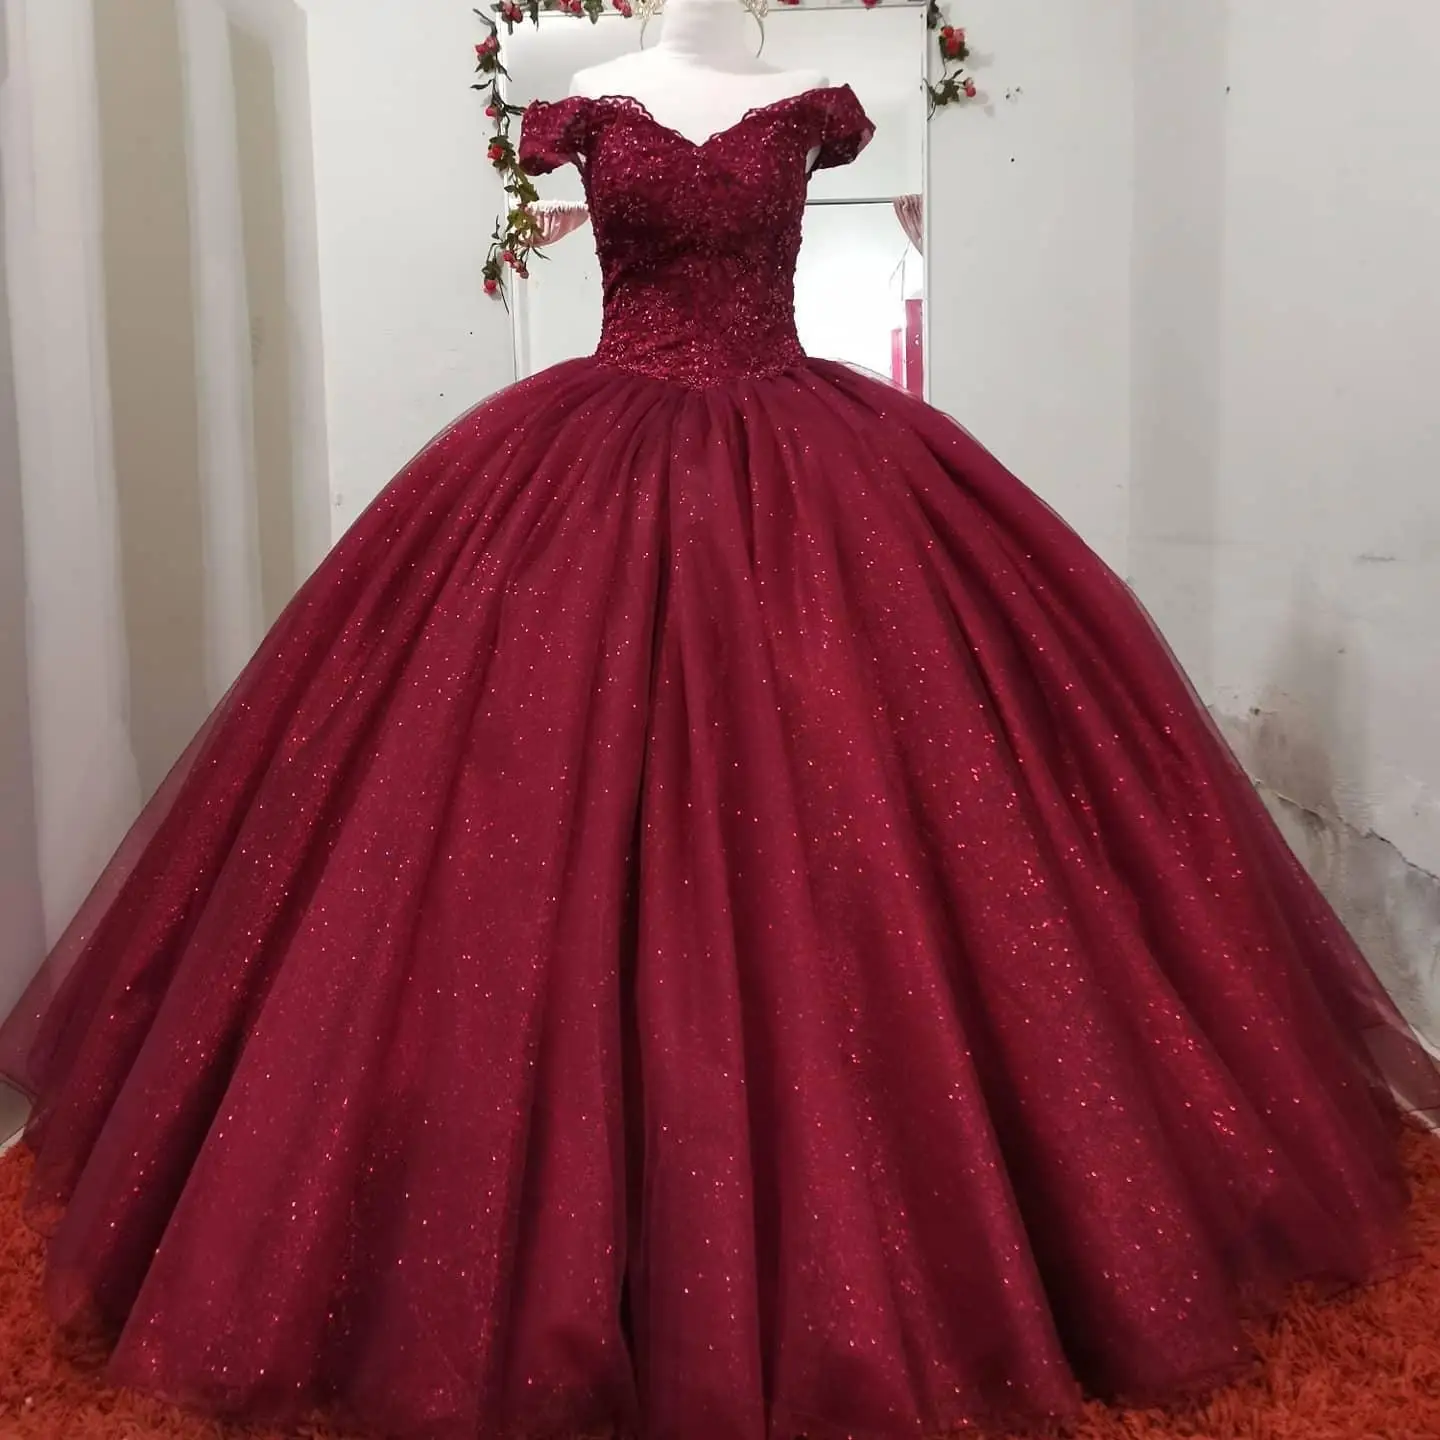 

ANGELSBRIDEP Sparkly Burgundy Glitter Quinceanera Dress Fashion Applique Tulle Formal Princess 15 Party Birthday Gowns Hot Sale